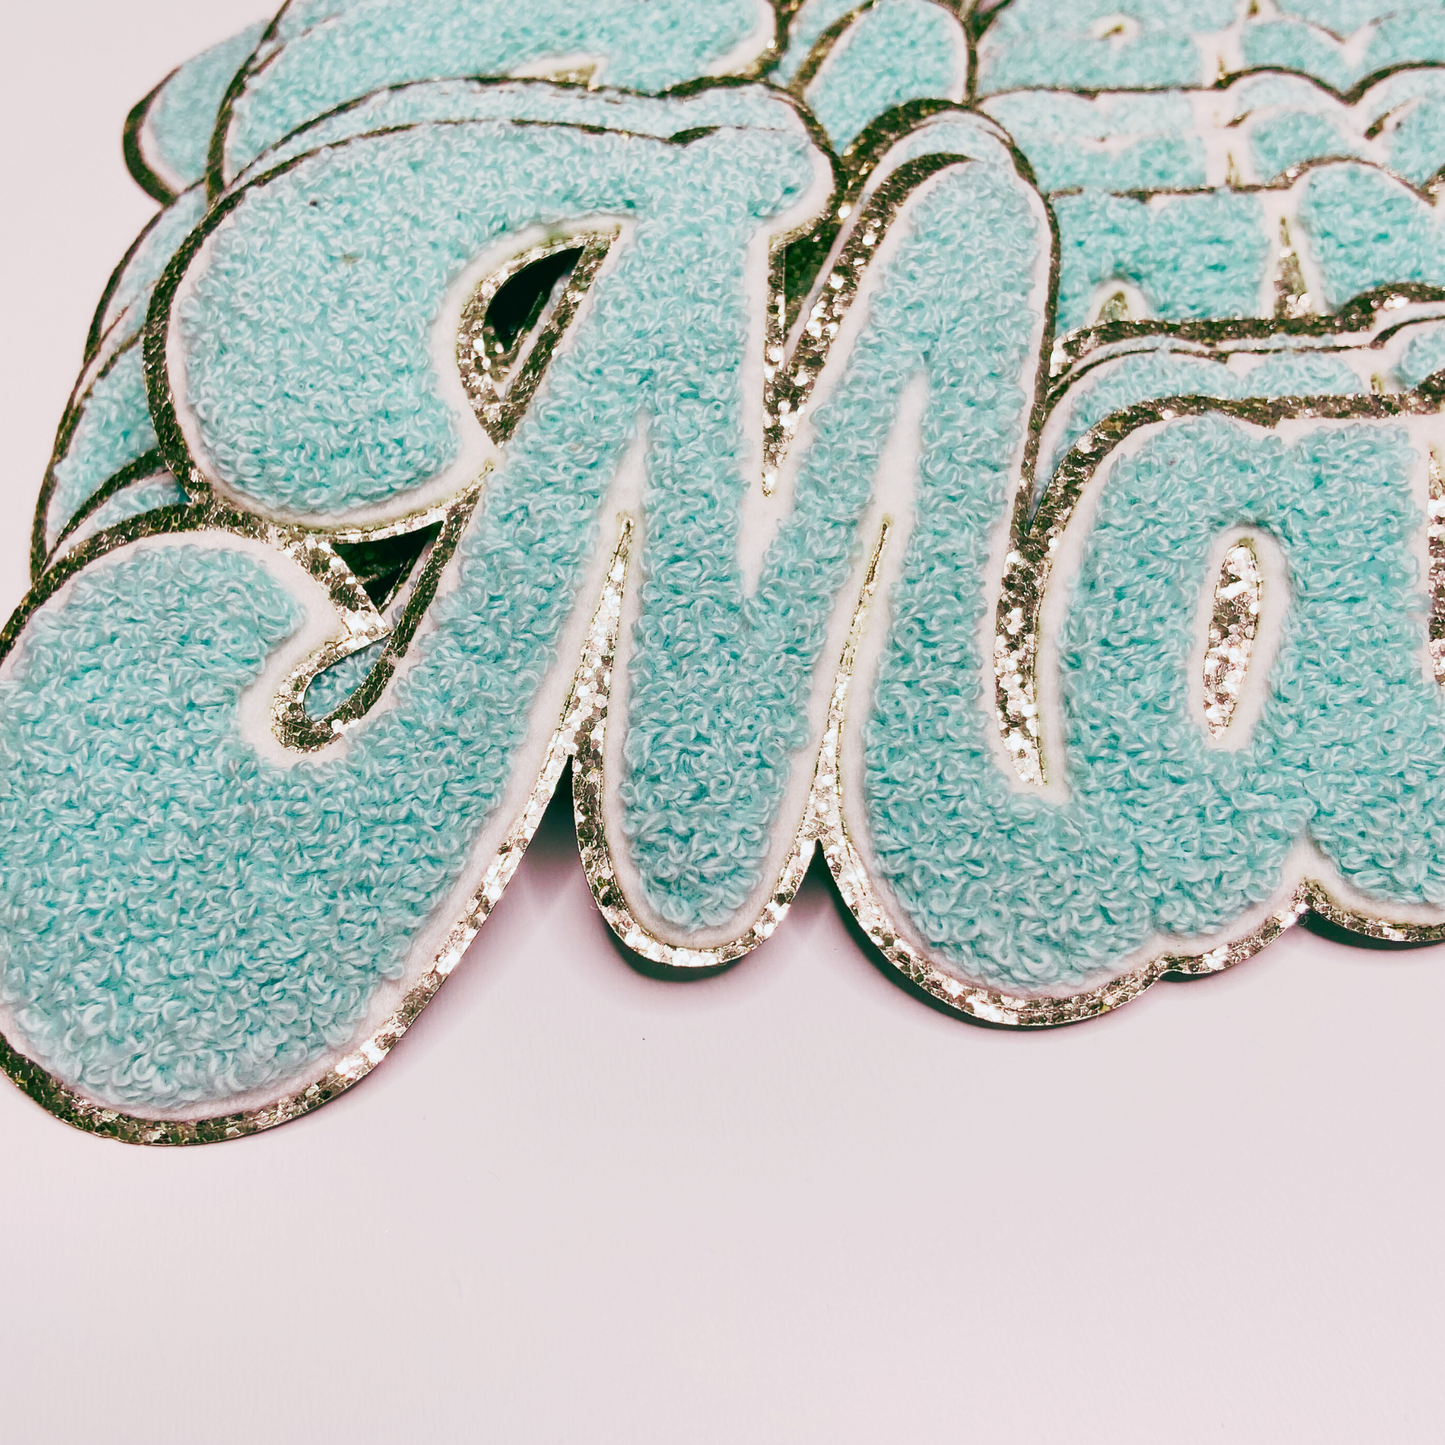 11" MAMA in Teal- Chenille Patch